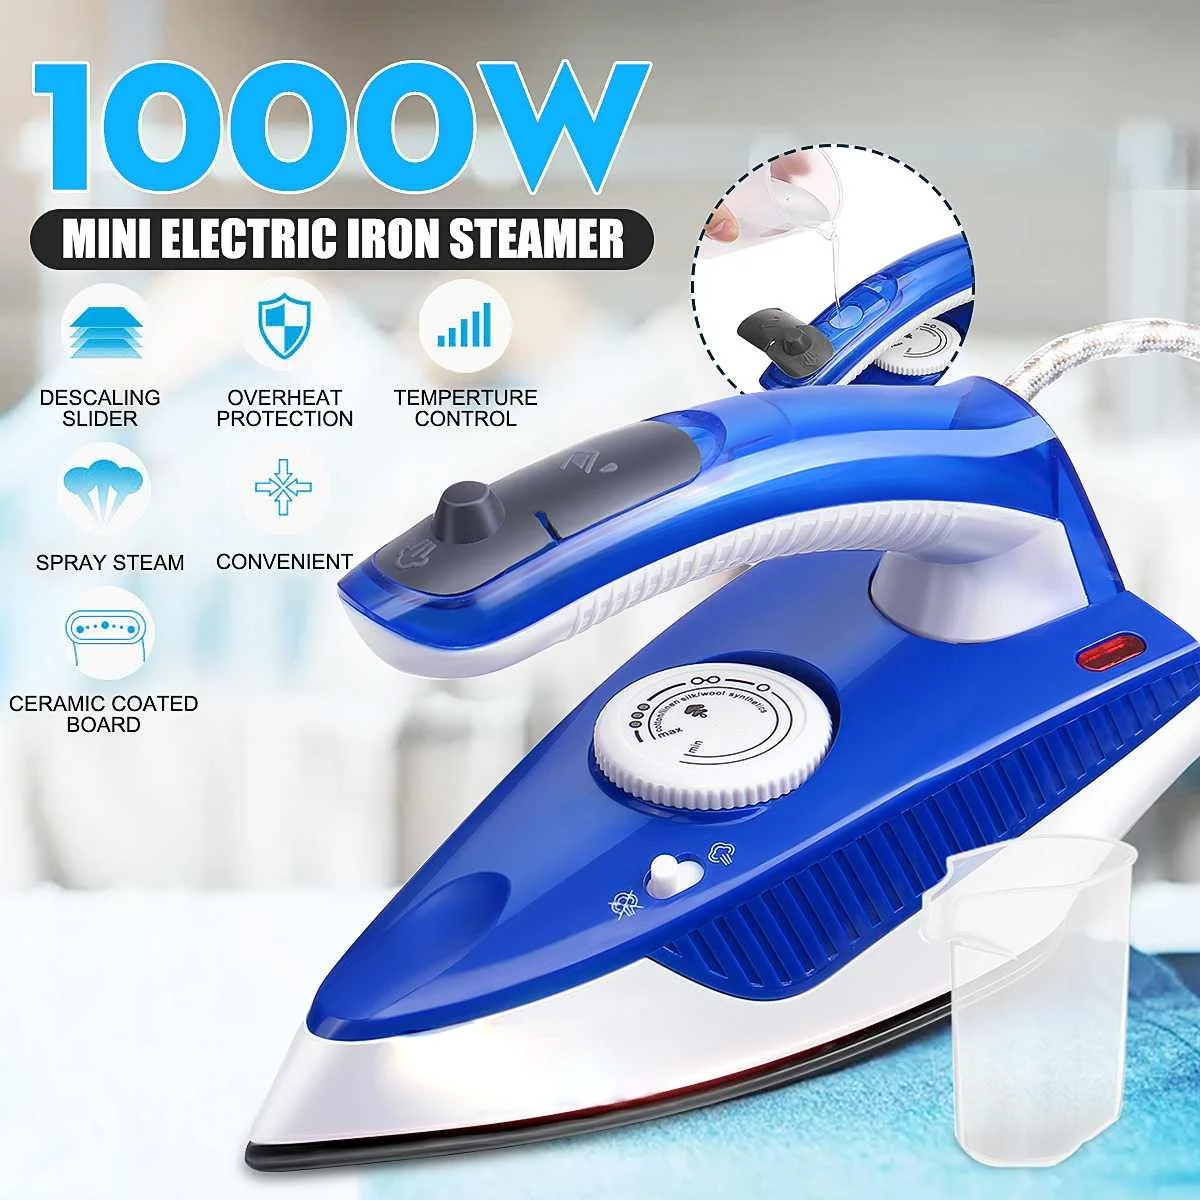 

1000W Mini Spray Steam Iron Ceramic Coating Soleplate Folding Handle Electric Irons Temperature control Clothes Ironing Steamer